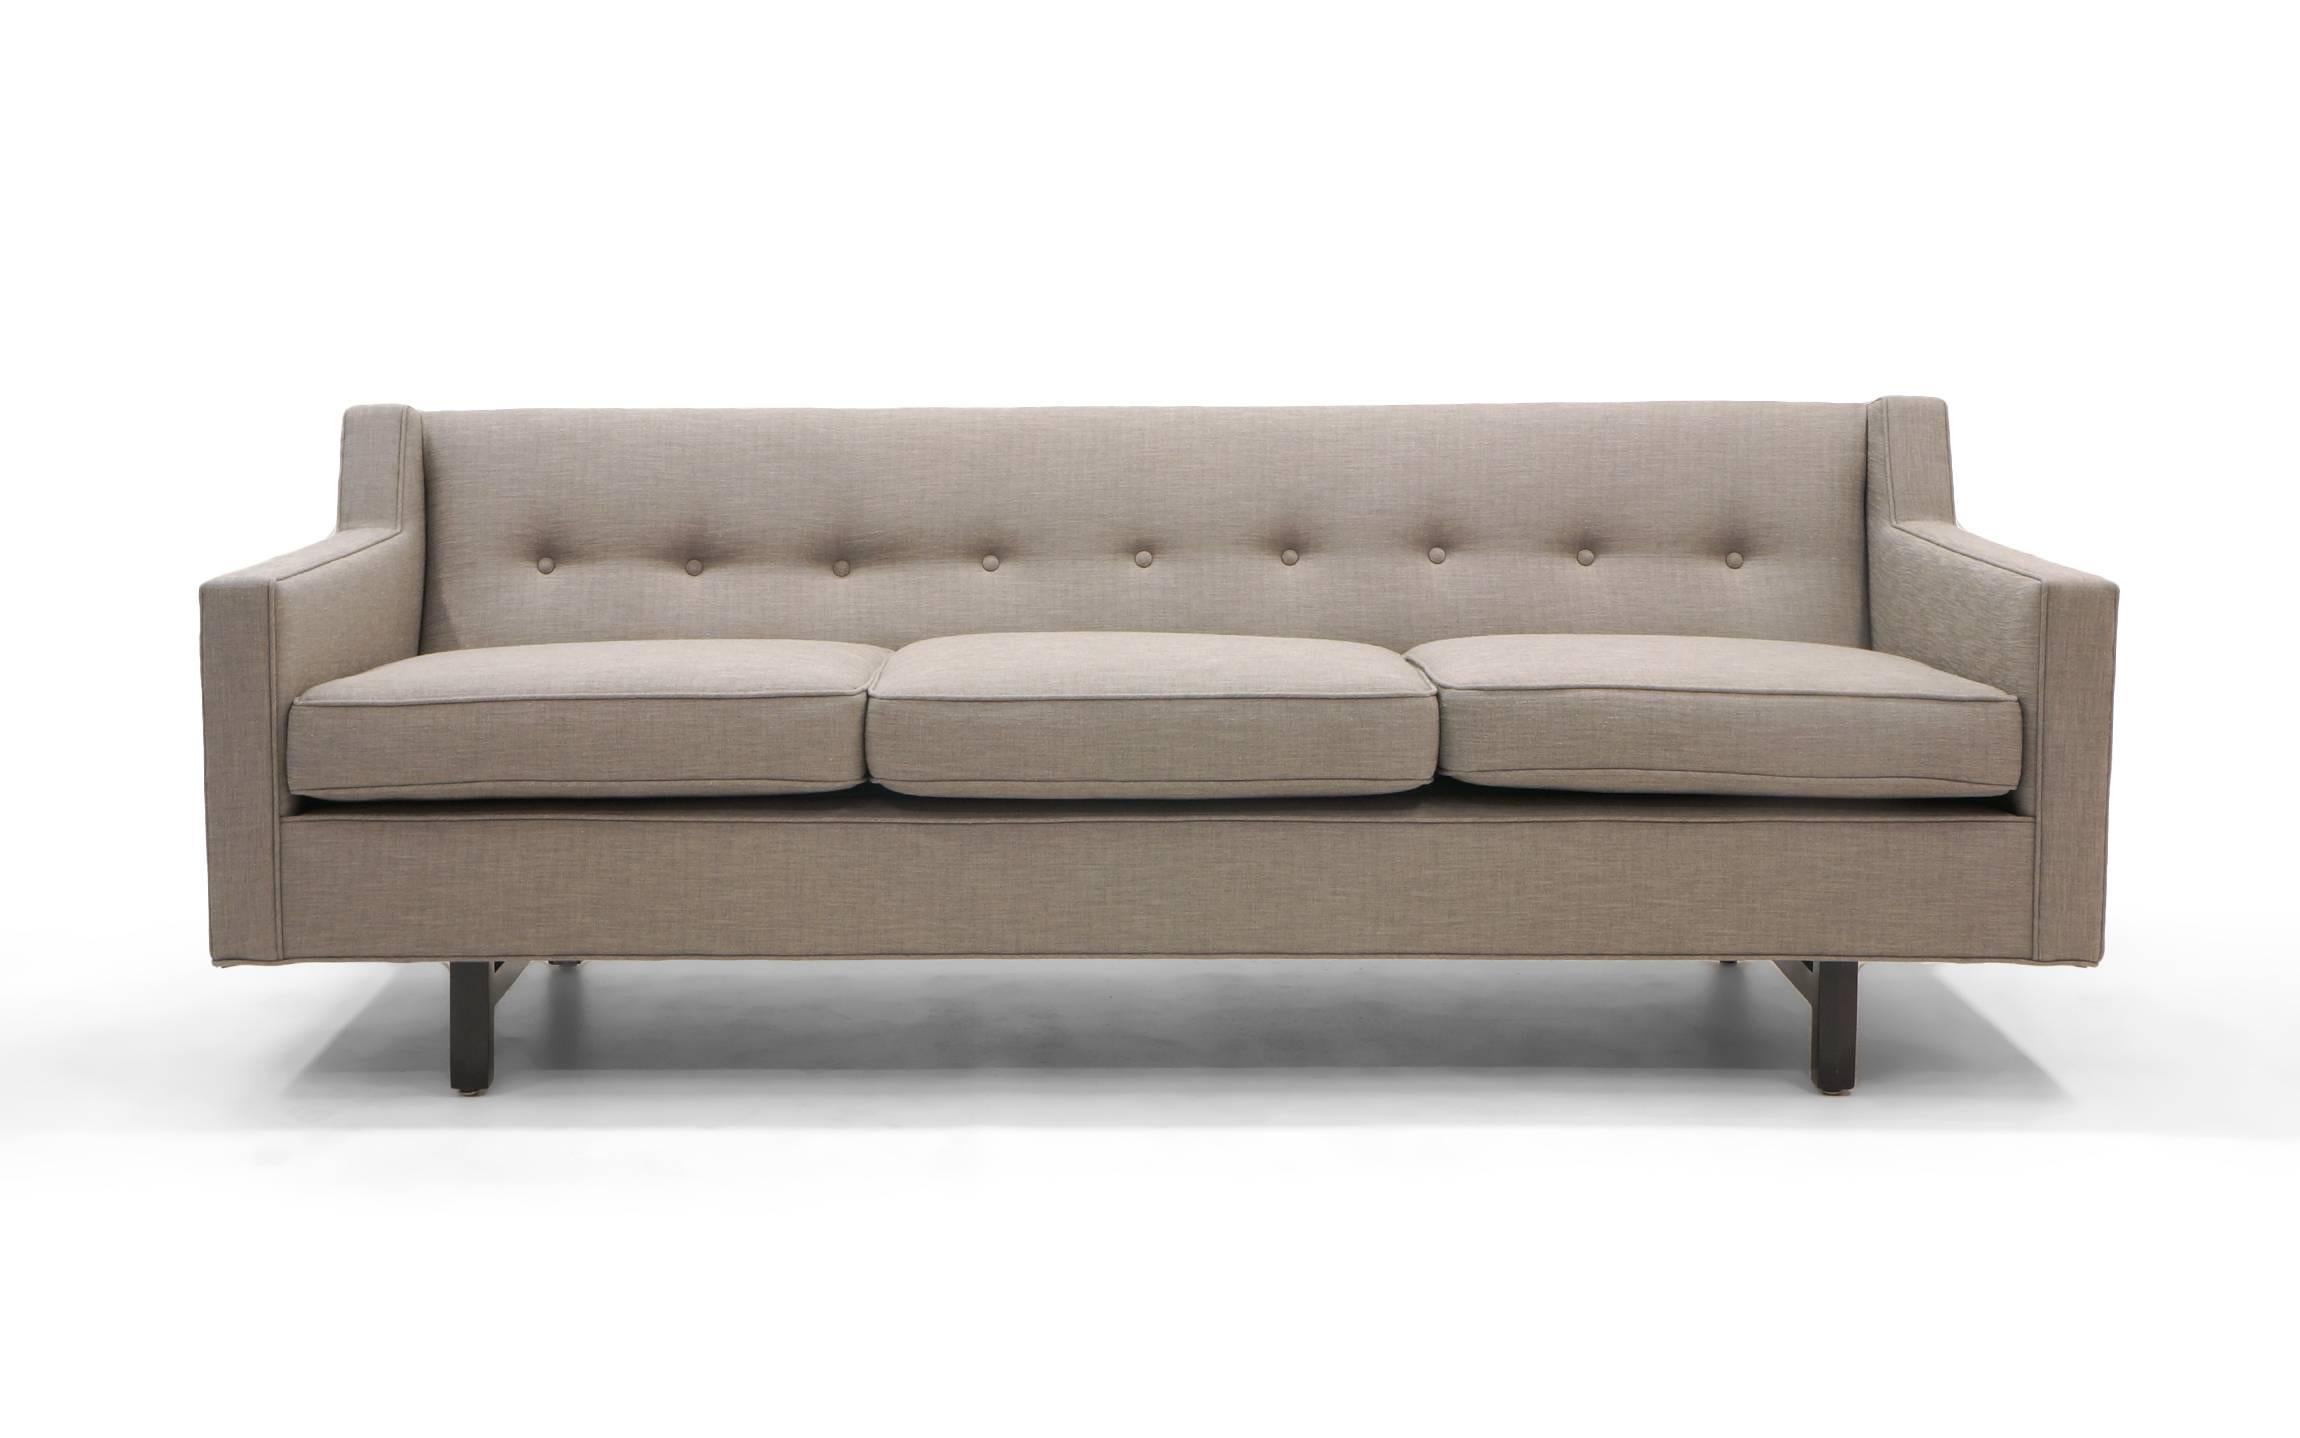 Classic Edward Wormley three-seat sofa. Fully restored and reupholstered in an elegant light gray / grey fabric. Buttoned back behind down filled loose cushions.